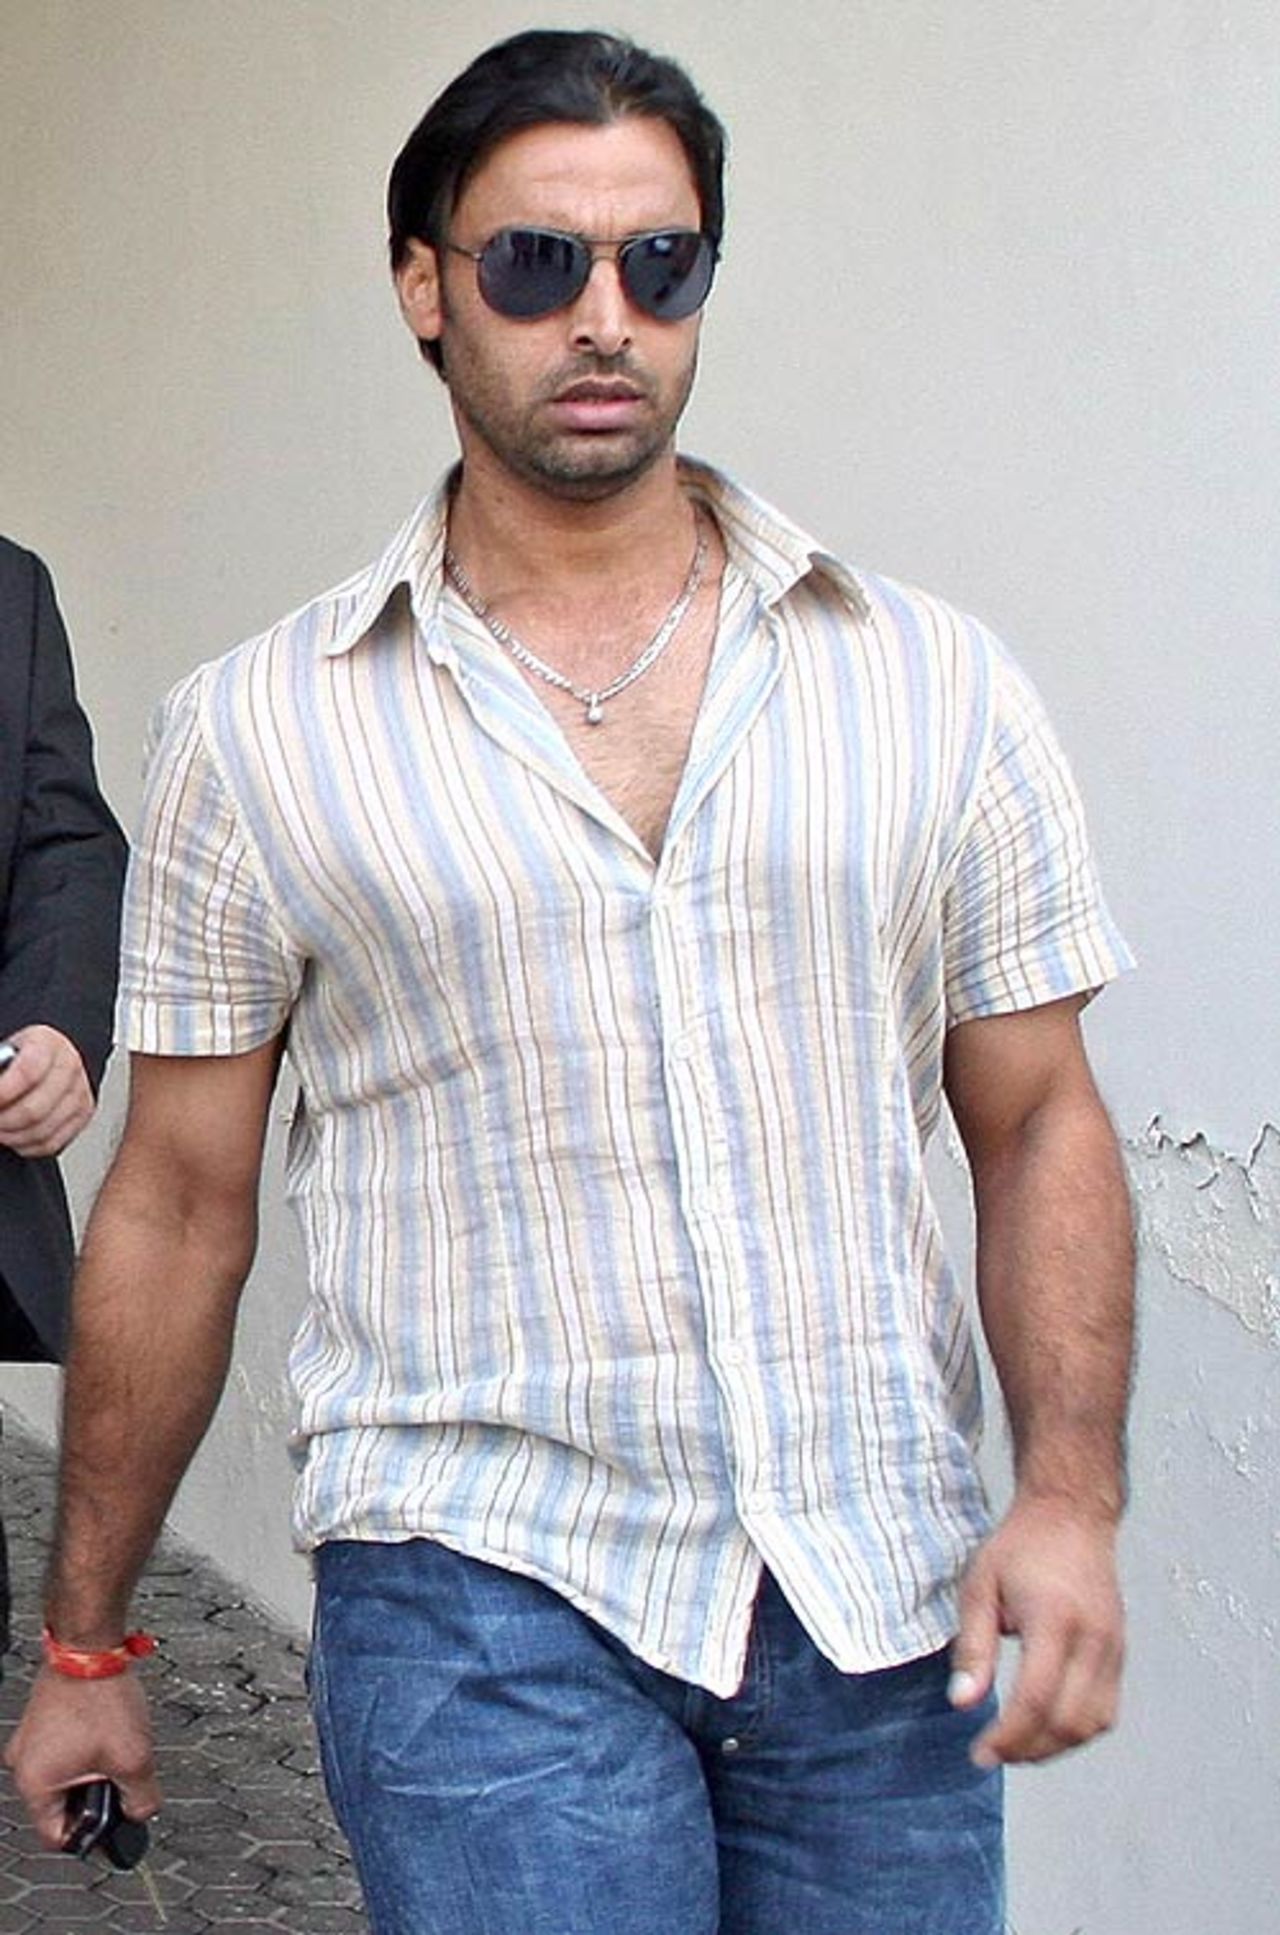 Shoaib Akhtar, who faces a two-year ban, leaves the doping hearing at the Gaddafi Stadium, Lahore, October 28, 2006